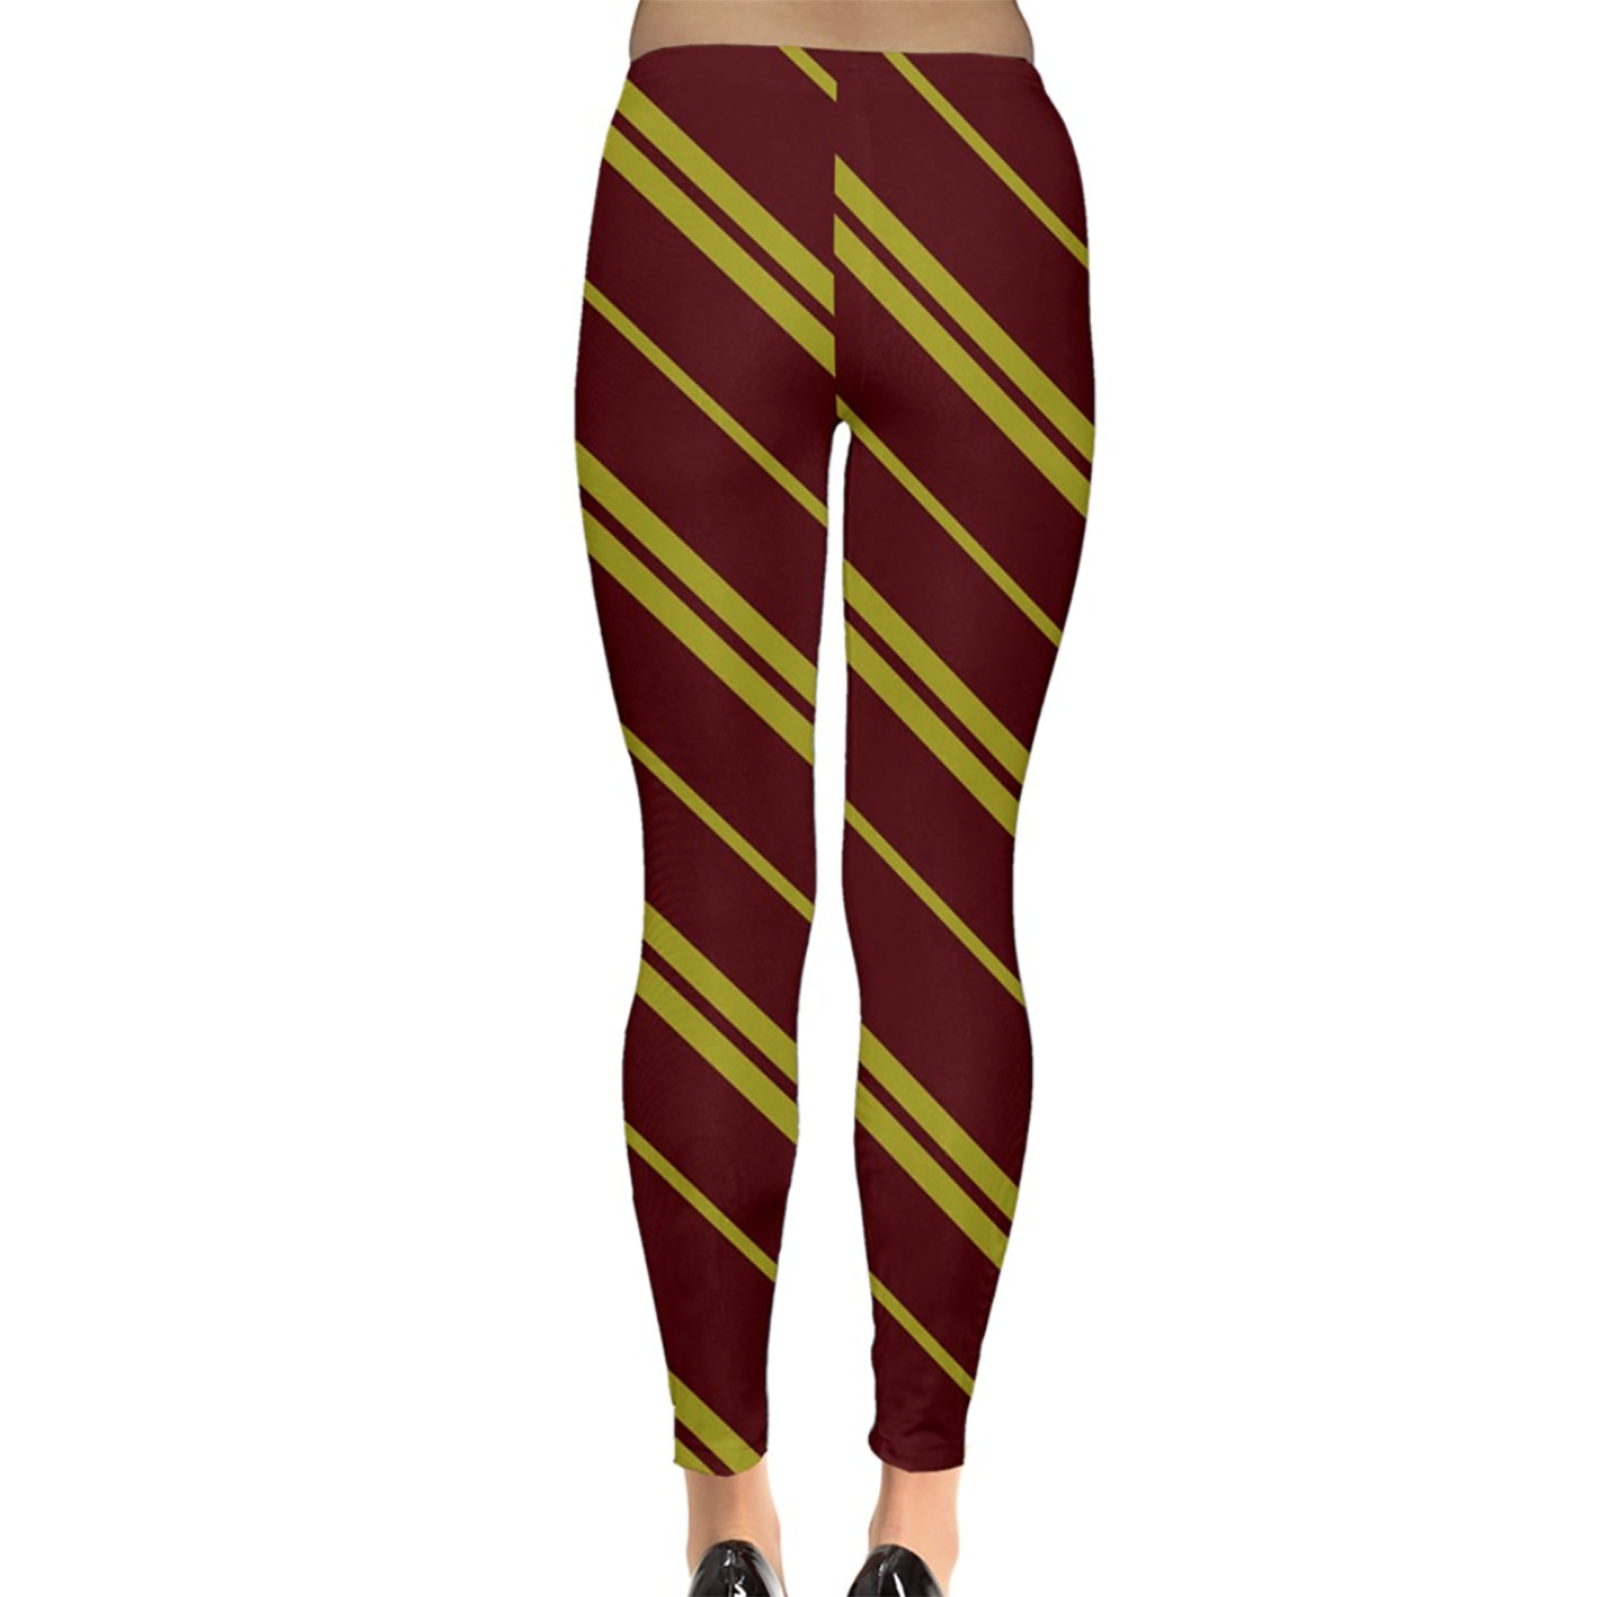 Red & Gold Striped Leggings - Inspired by Gryffindor